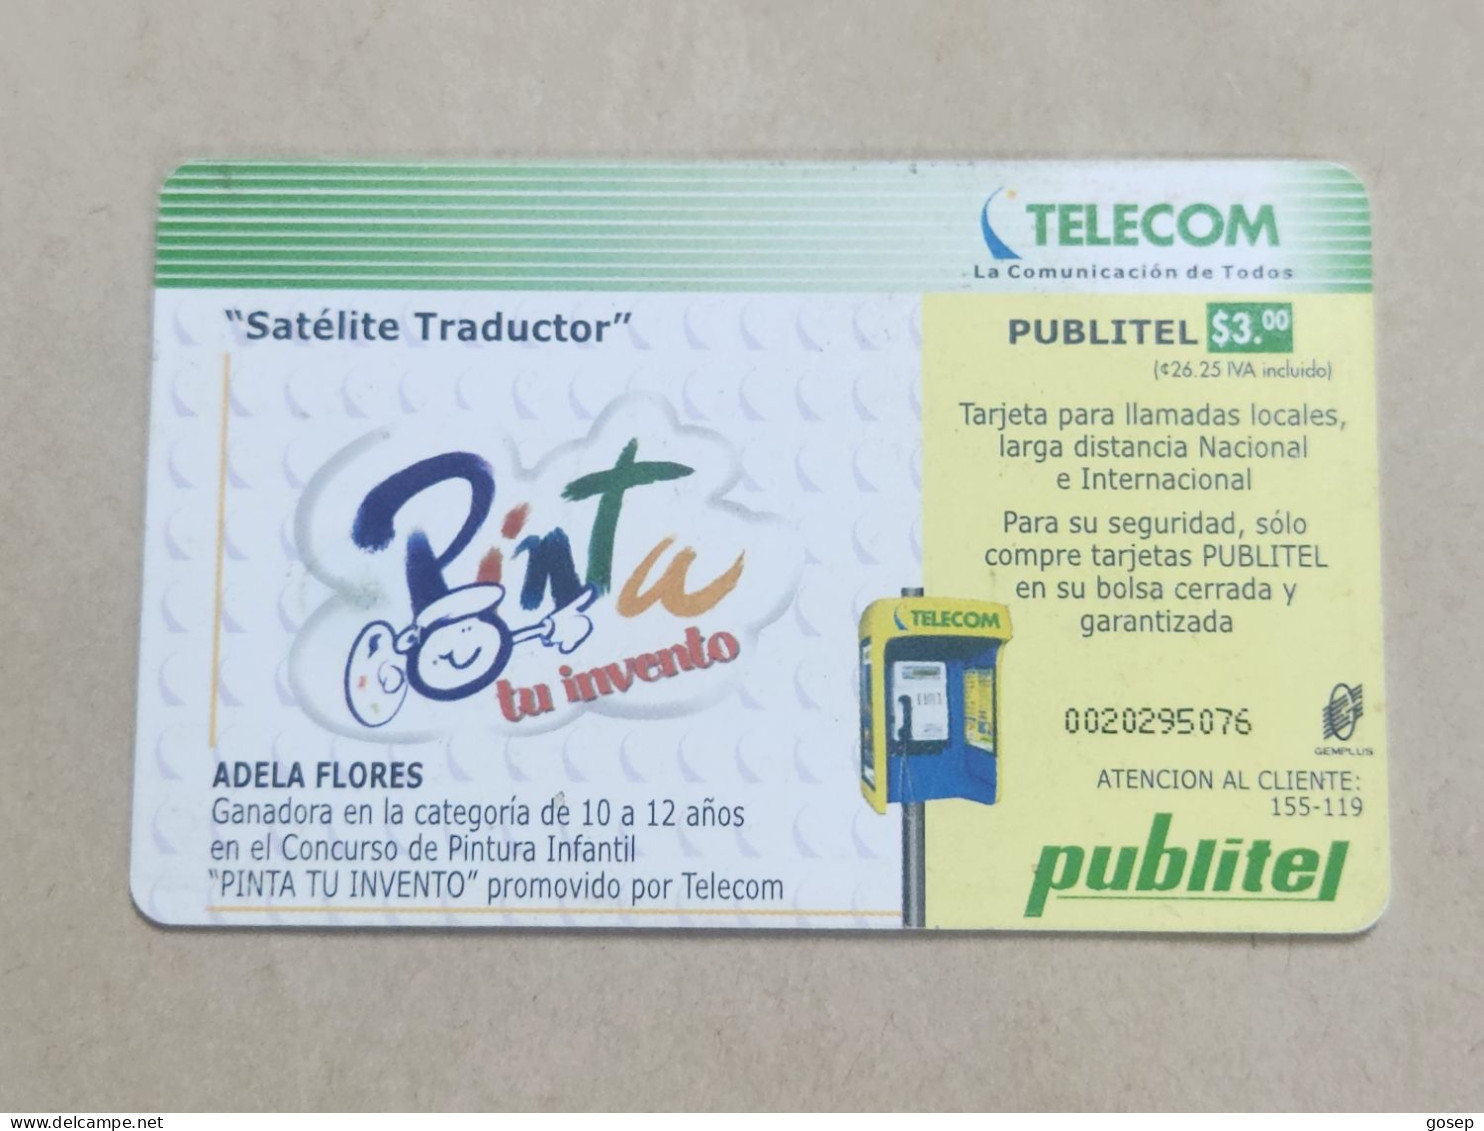 COLOMBIA-(ELS-PUB-0048A)-SATELITE TRADUCTOR-(3)-($ 3.00)-(0020295076)-used Card+1card Prepiad Free - Colombia